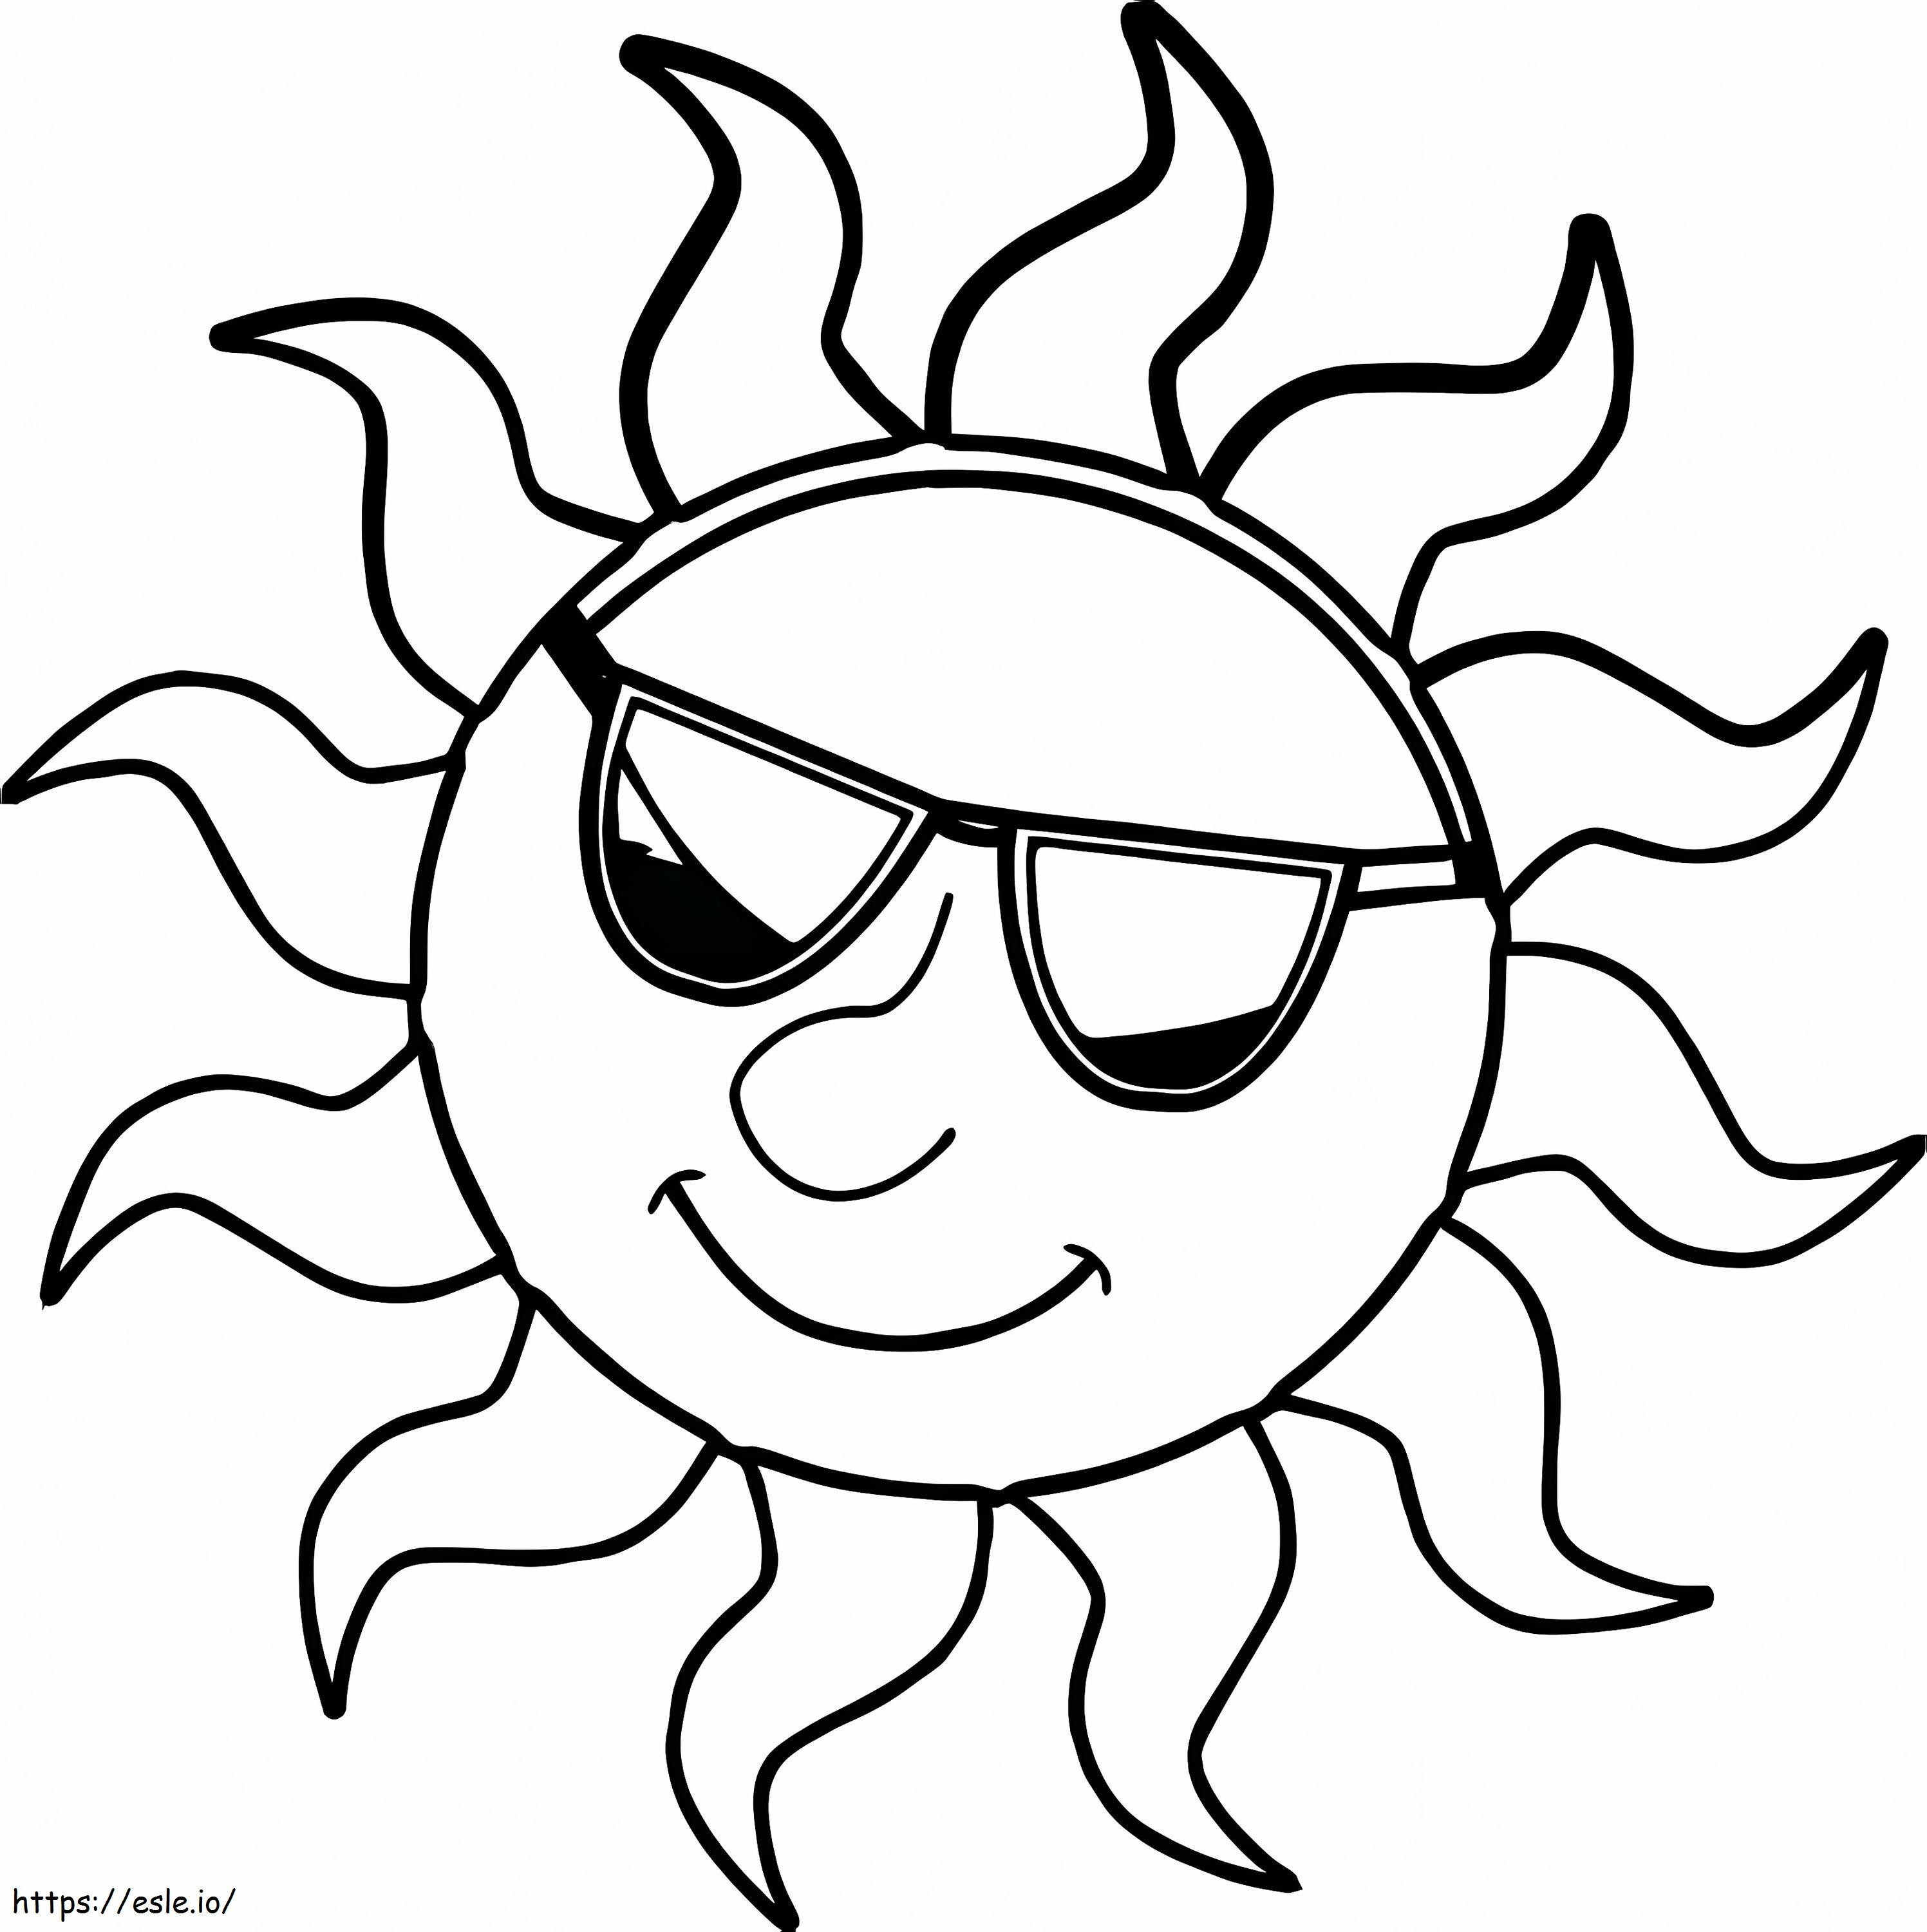 Nice Sun coloring page